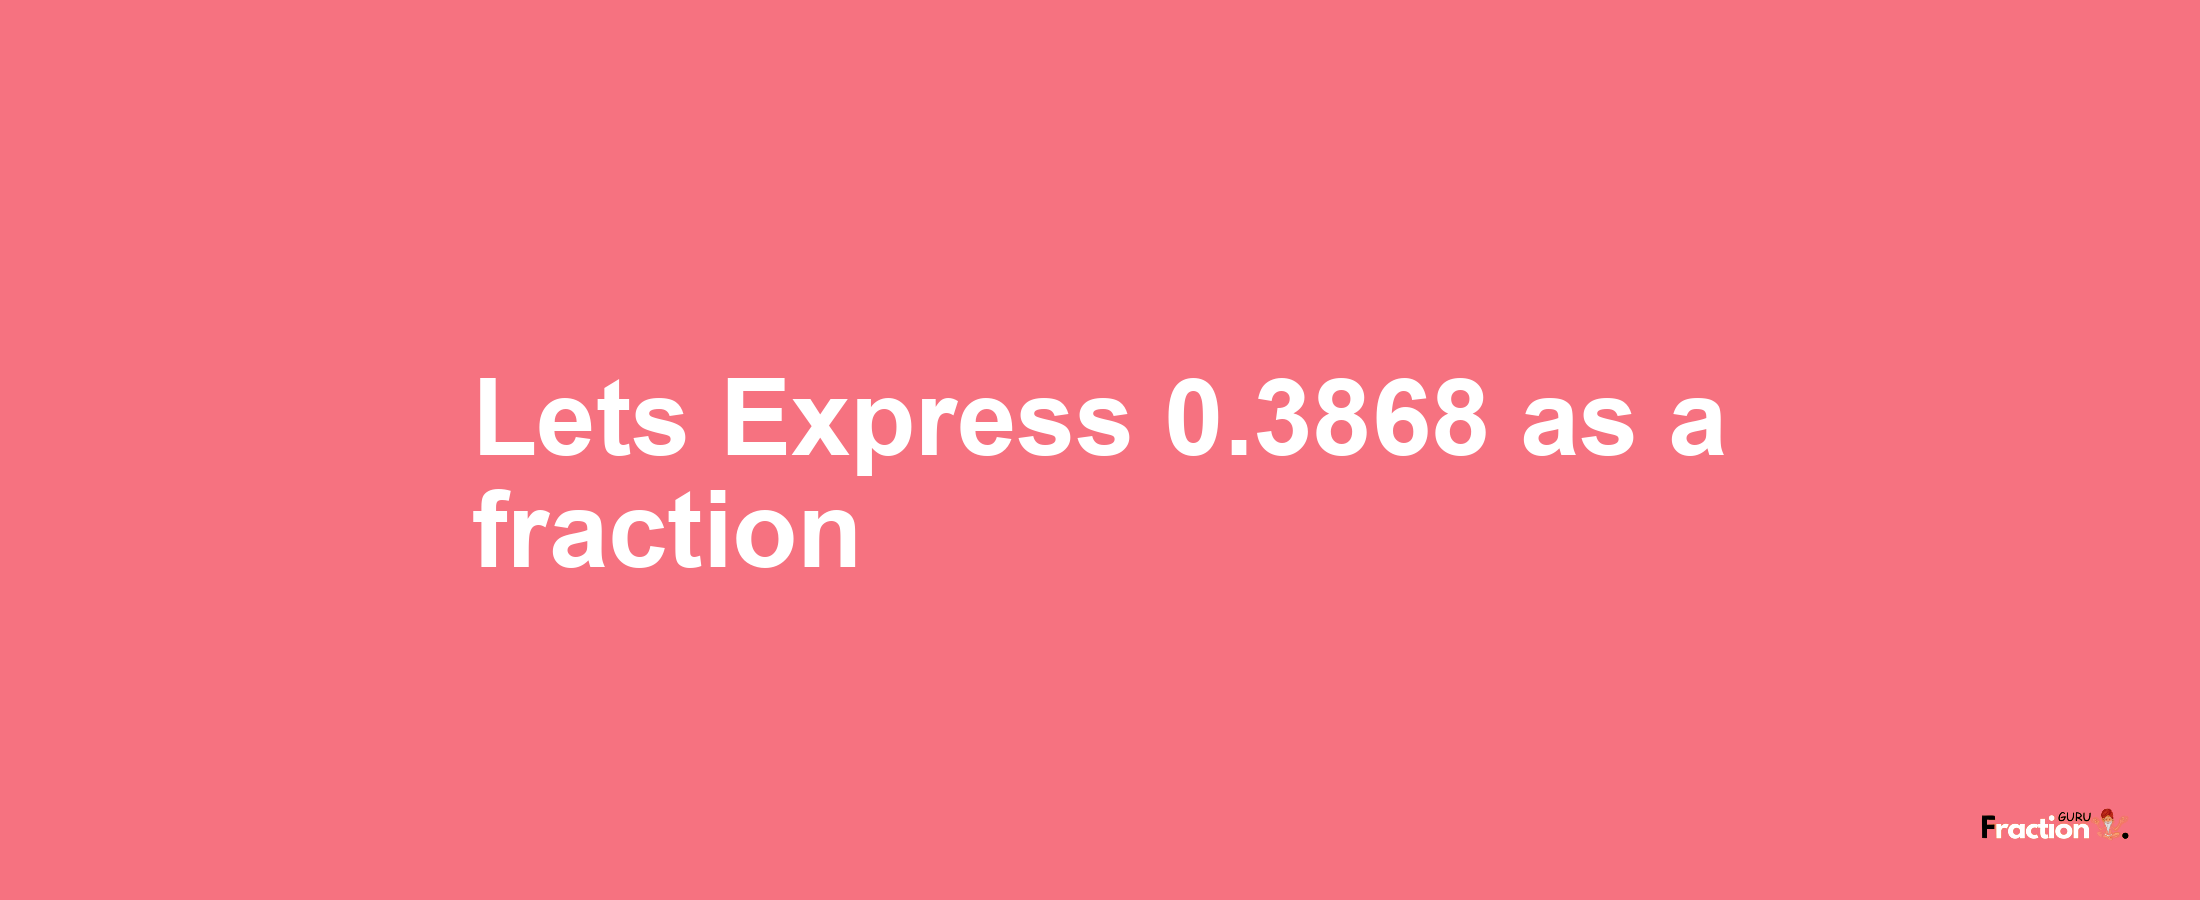 Lets Express 0.3868 as afraction